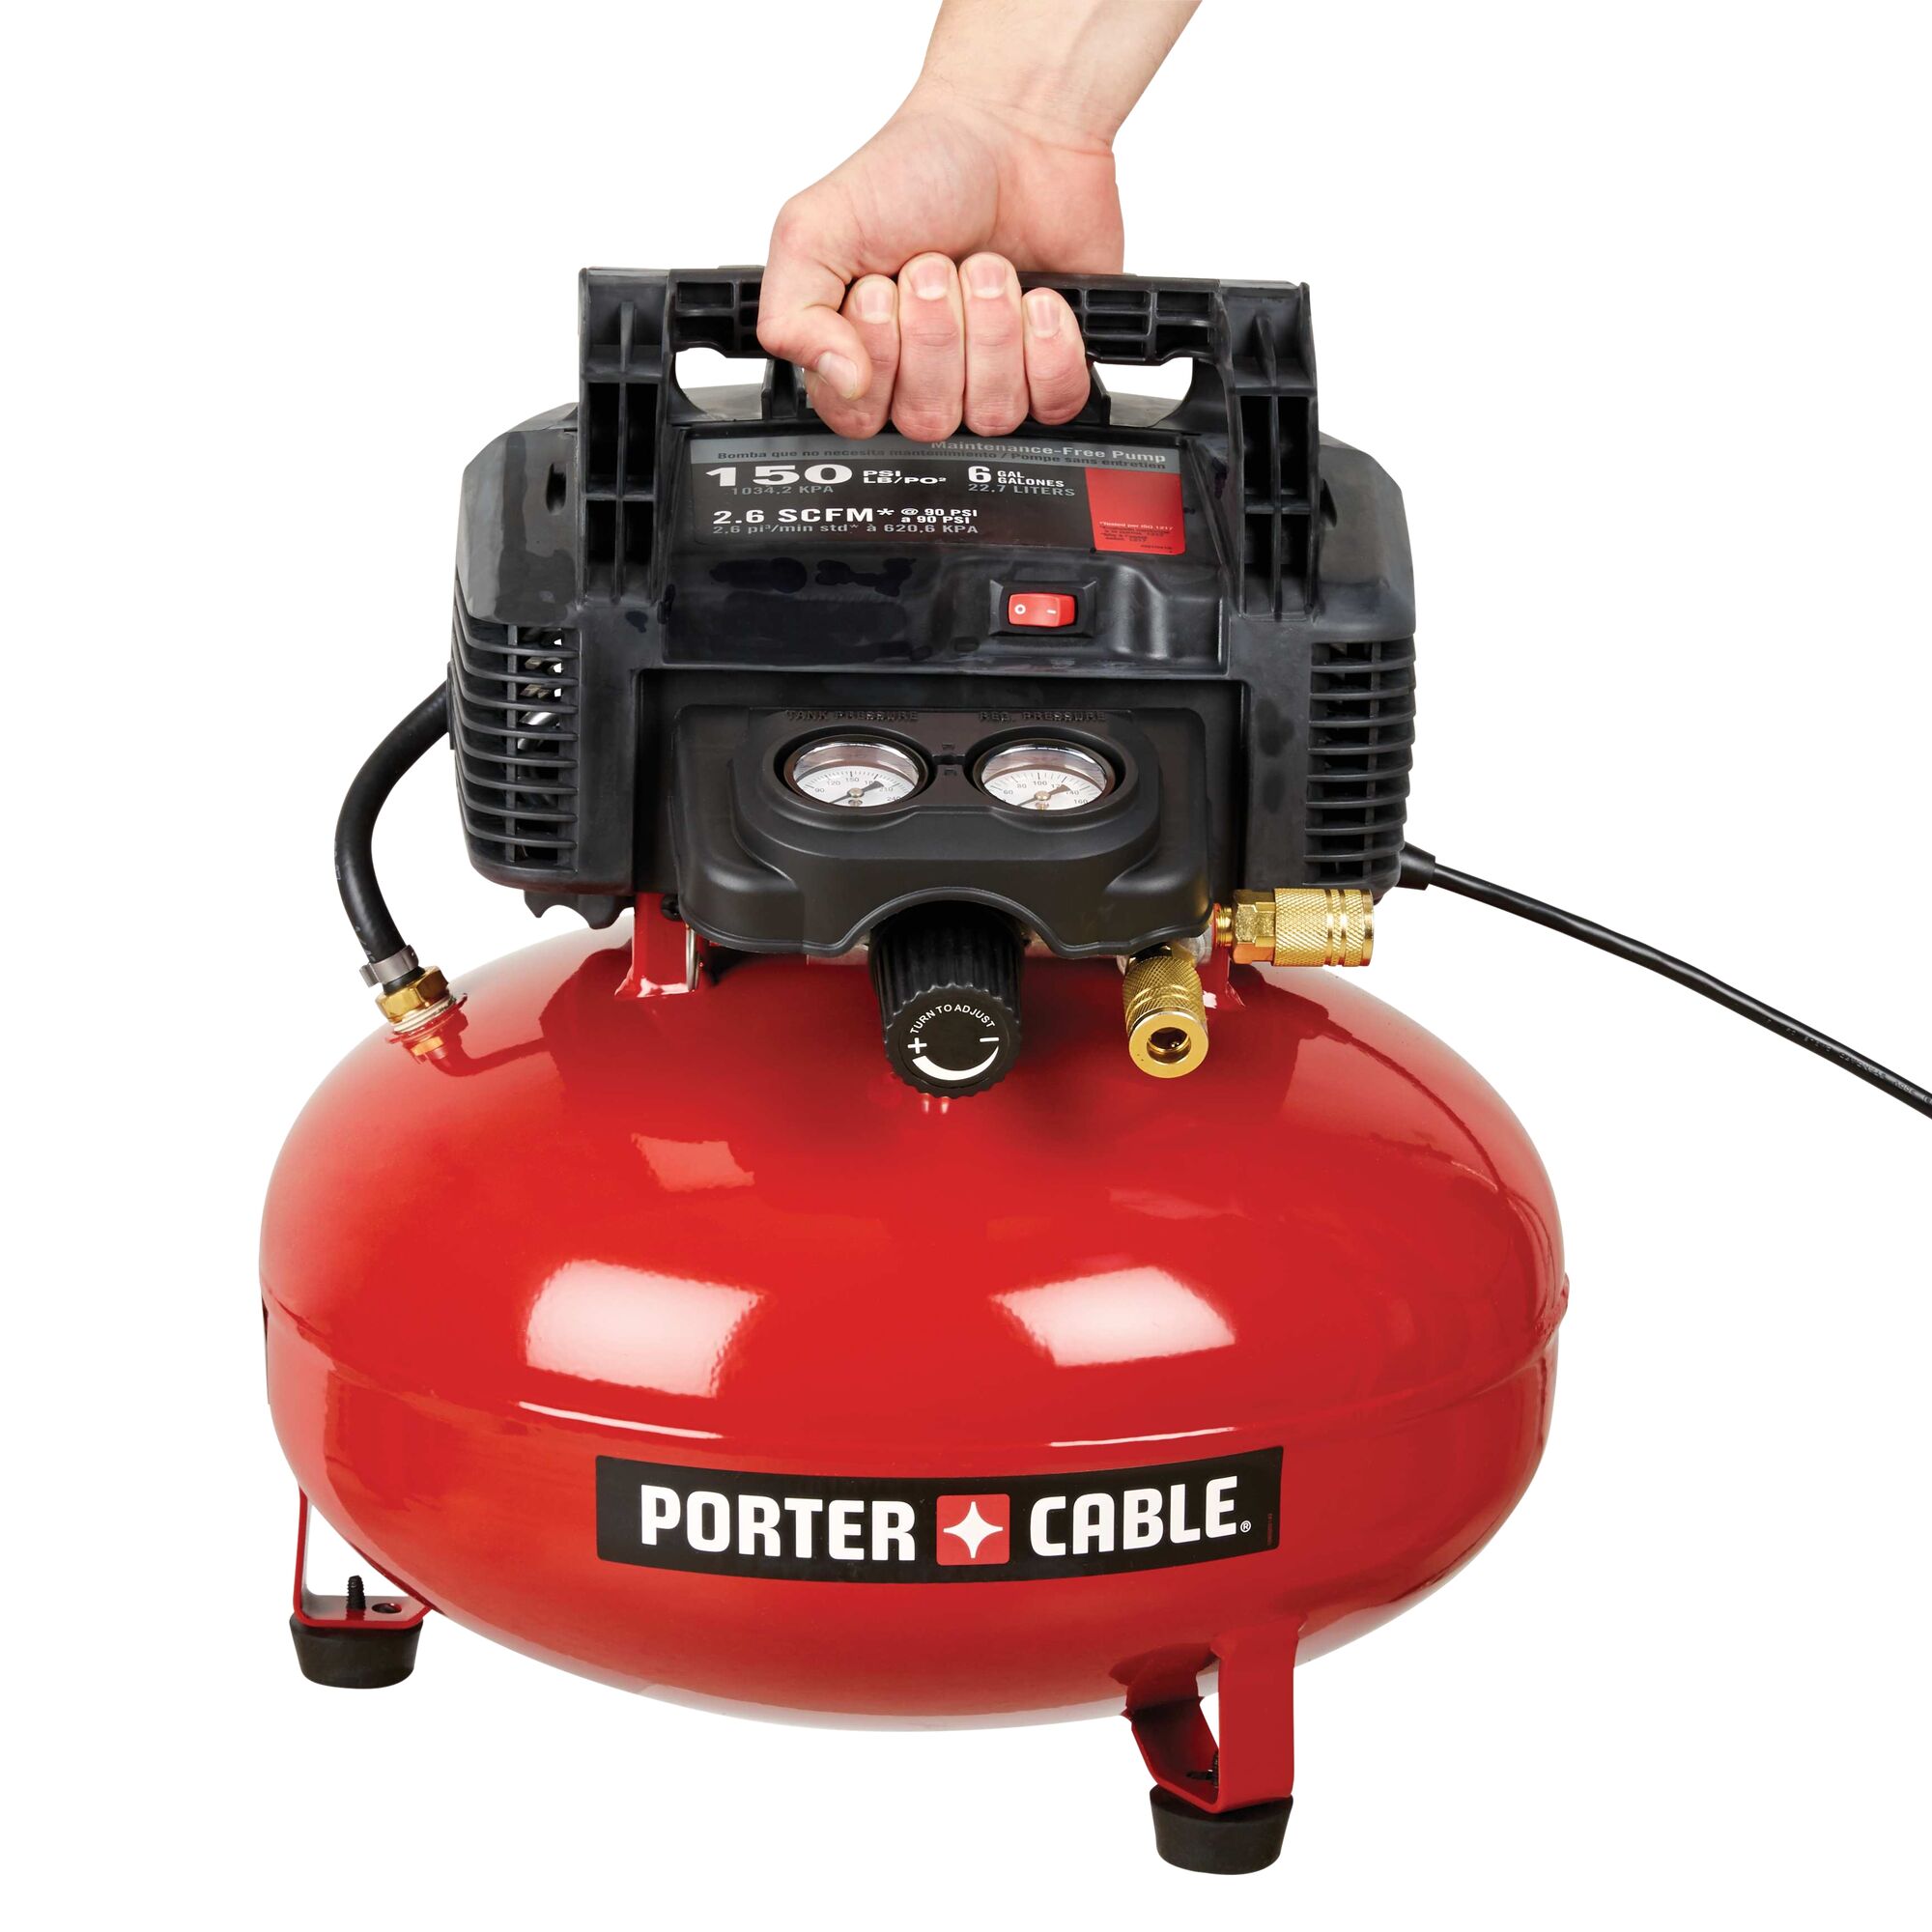 PORTER CABLE C2002 150 PSI Portable 6 Gallon Oil-Free Pancake Air Compressor Red/Black for sale online 